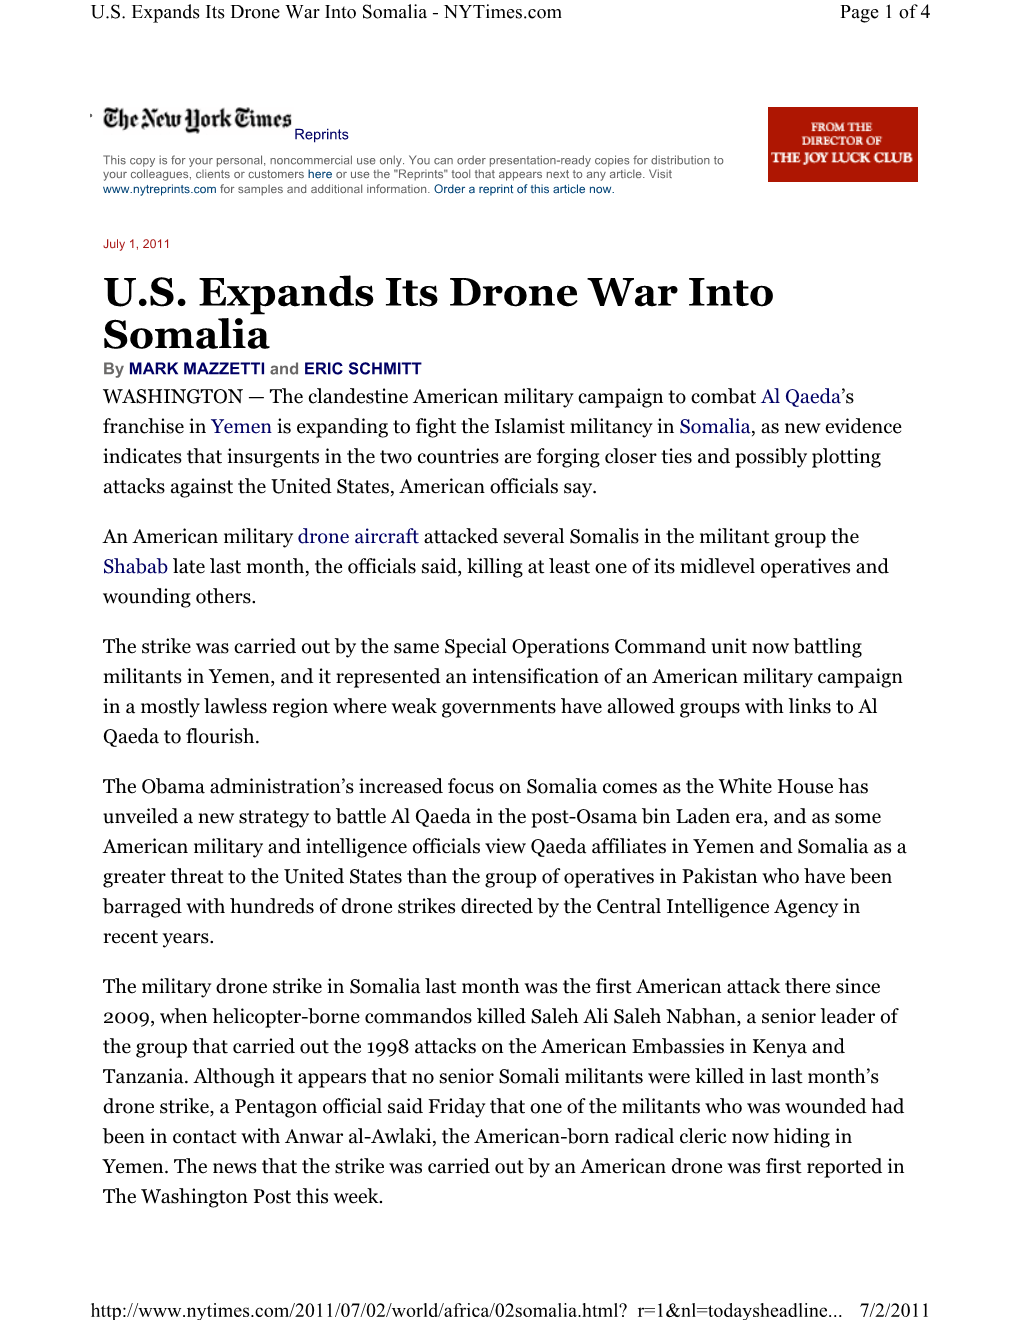 U.S. Expands Its Drone War Into Somalia - Nytimes.Com Page 1 of 4